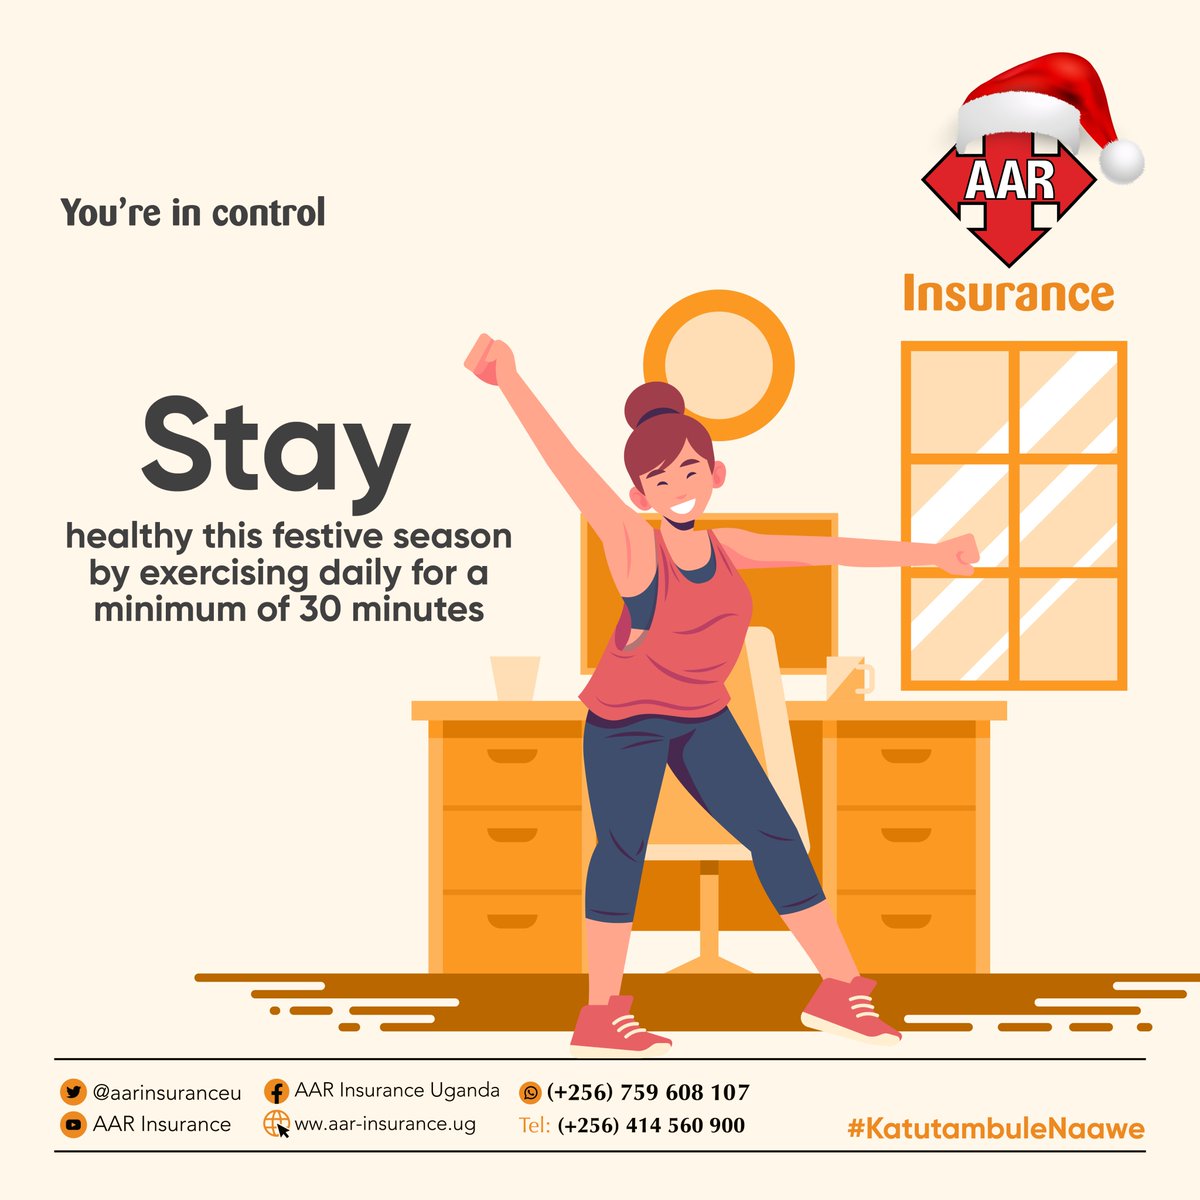 It’s the Christmas holiday. Don't forget to stay healthy.
#AARInsurance #KatutambuleNawe